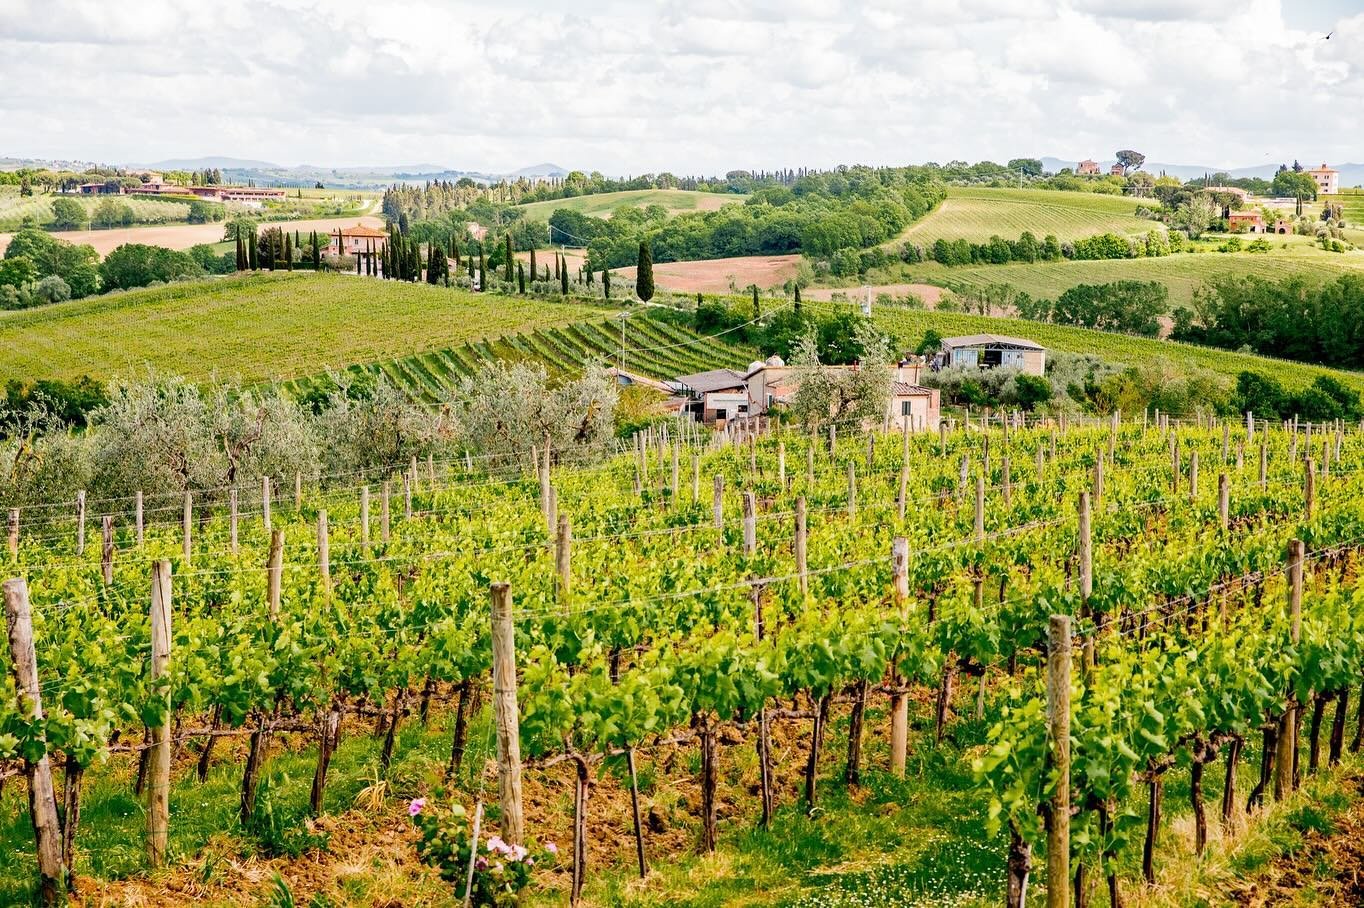 Visiting Italy soon? Swipe away the dread of Mondays with these postcards from Tuscany&rsquo;s lush wine country (that could also pass for the OG Microsoft wallpaper 🖼️) 

Before the travel season gets too crazy, the team tries to get OOO to check o